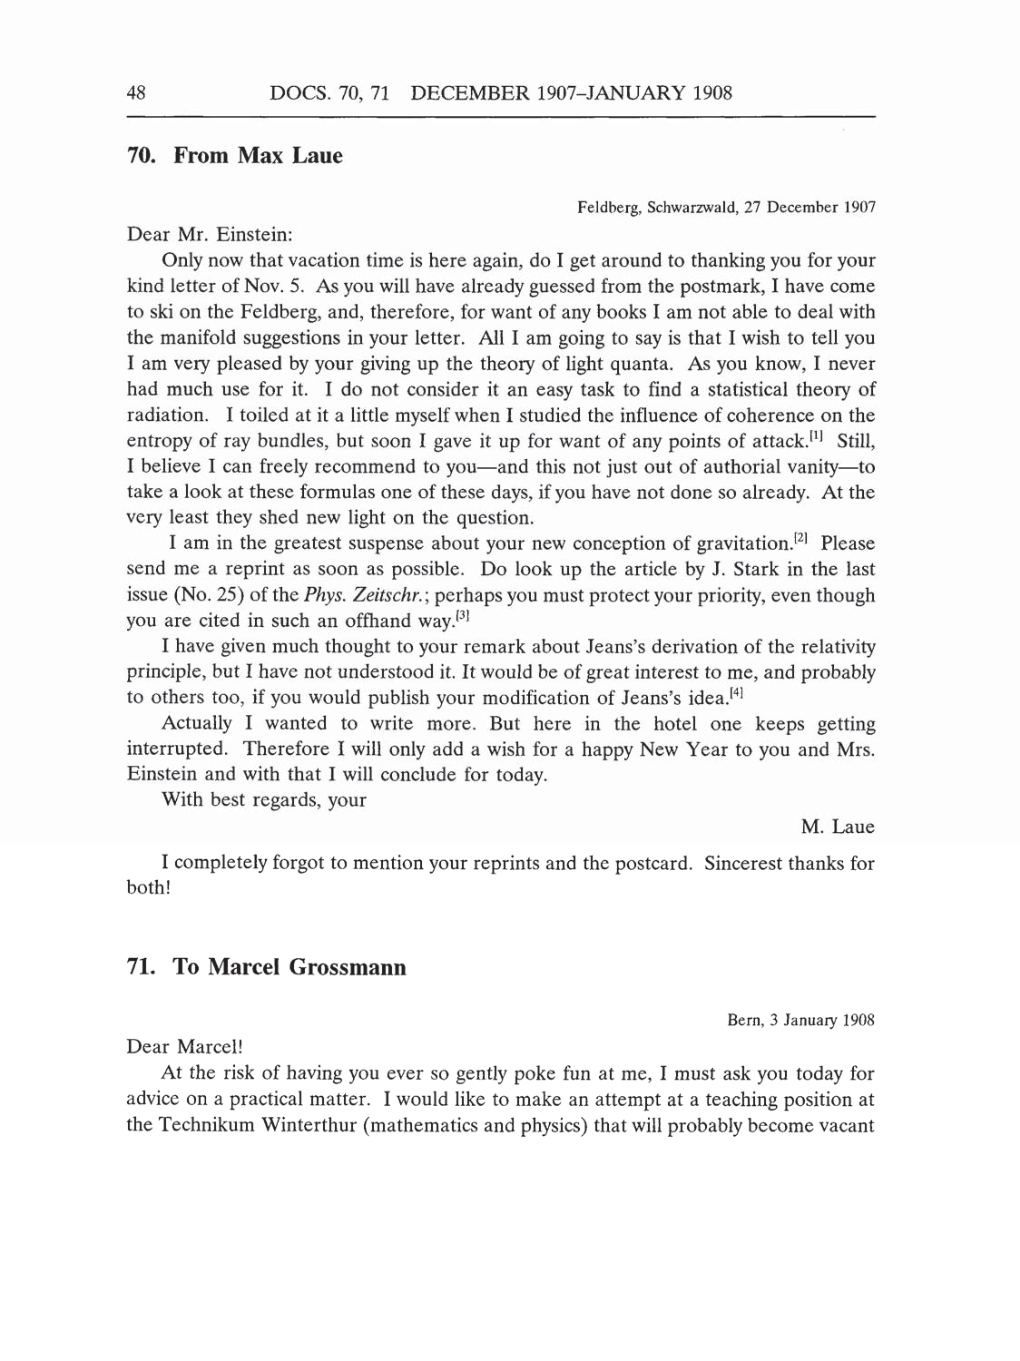 Volume 5: The Swiss Years: Correspondence, 1902-1914 (English translation supplement) page 48